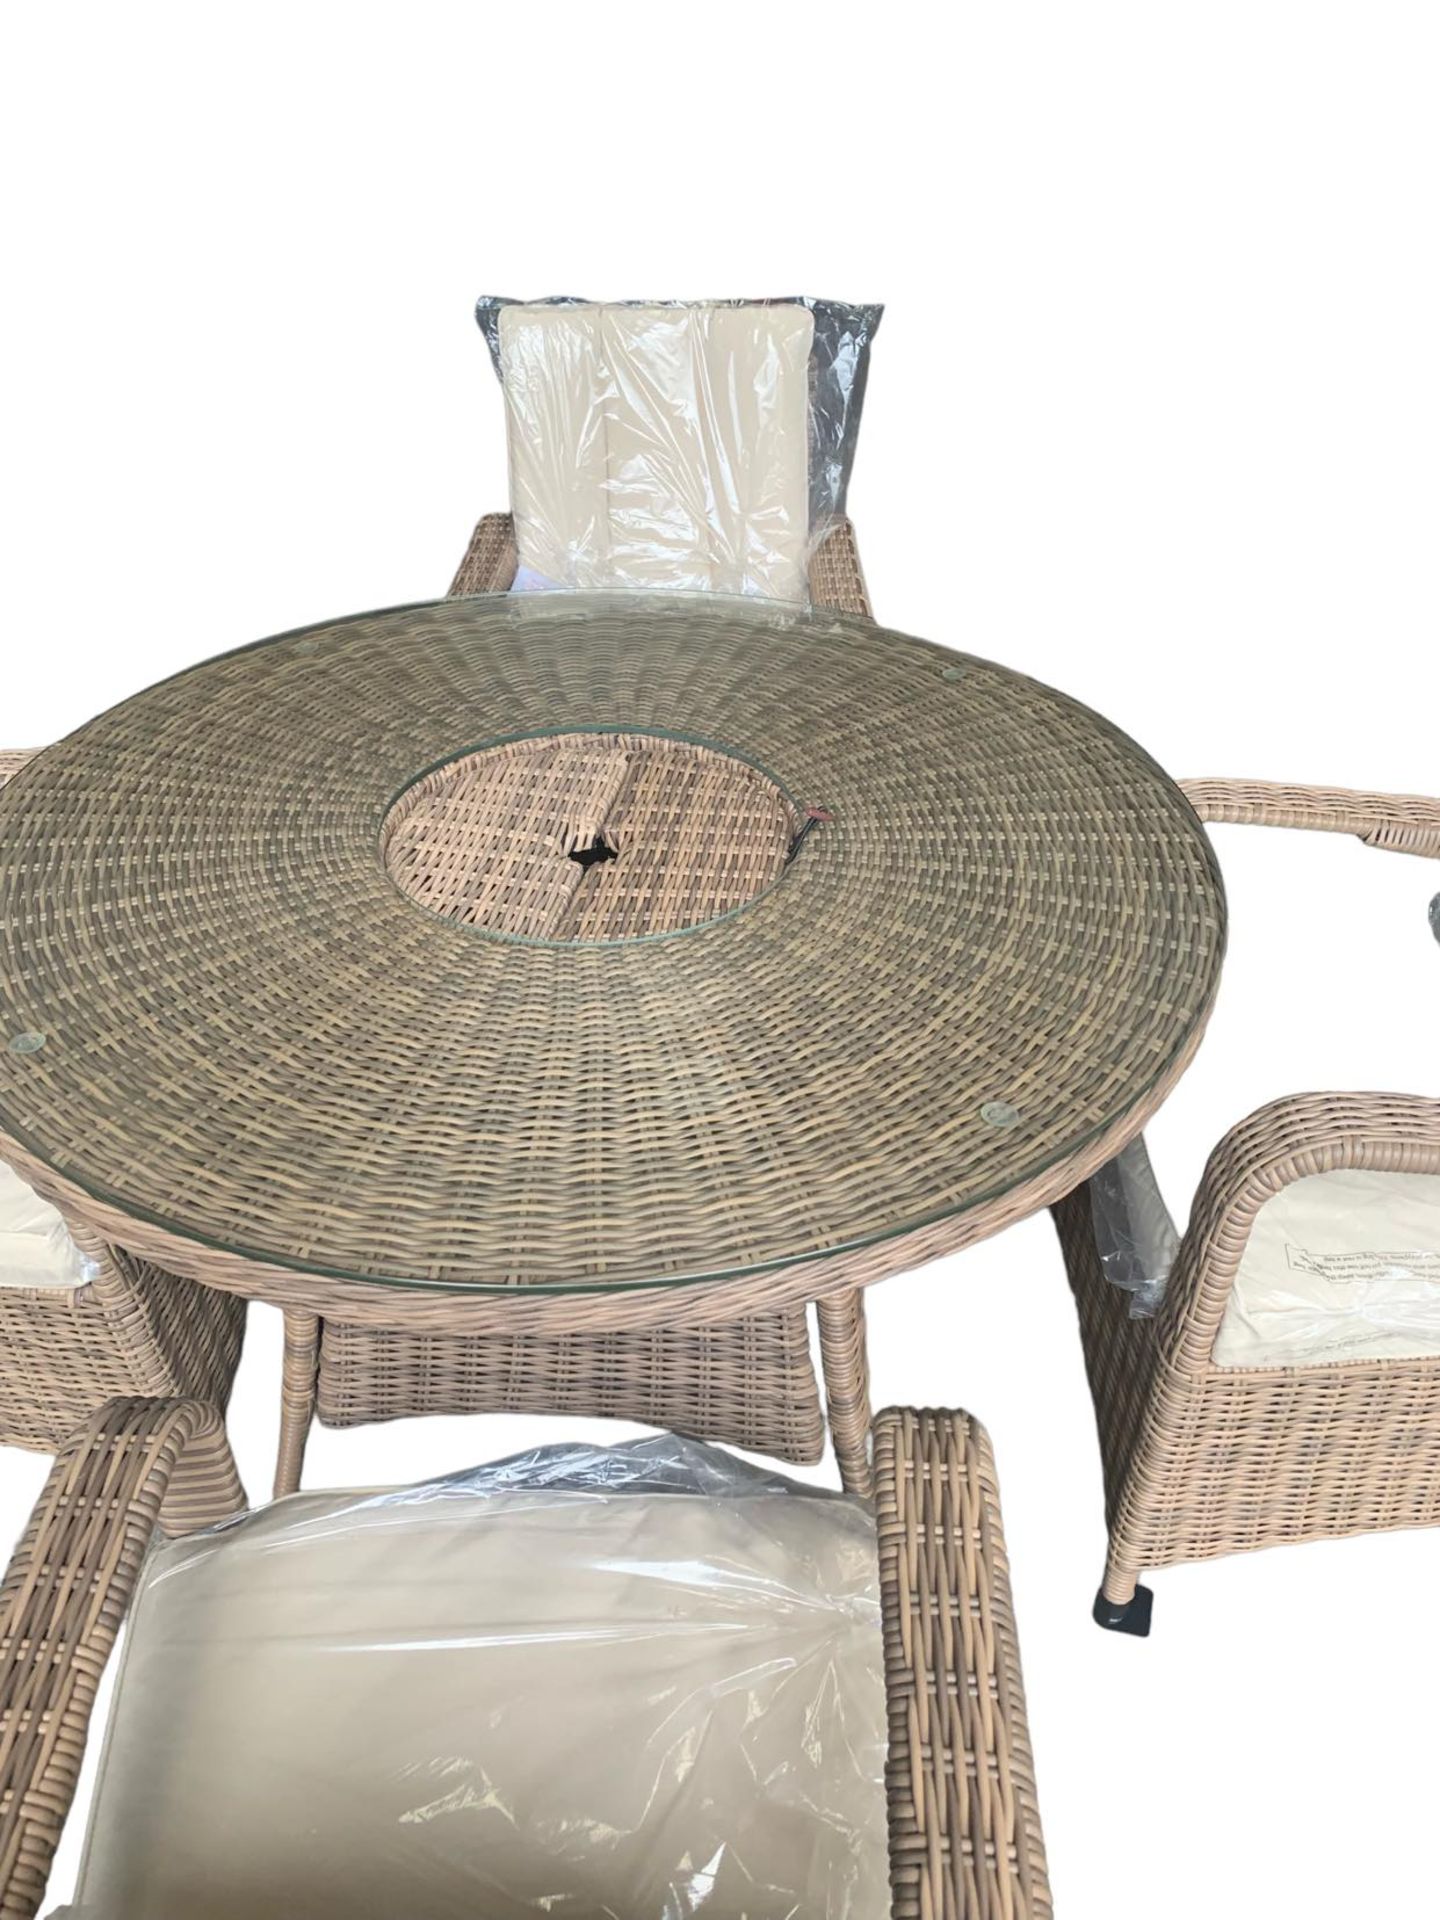 RATTAN SET 4 CHAIRS AND TABLE + ICEBUCKET+RAIN COVER - Image 3 of 5